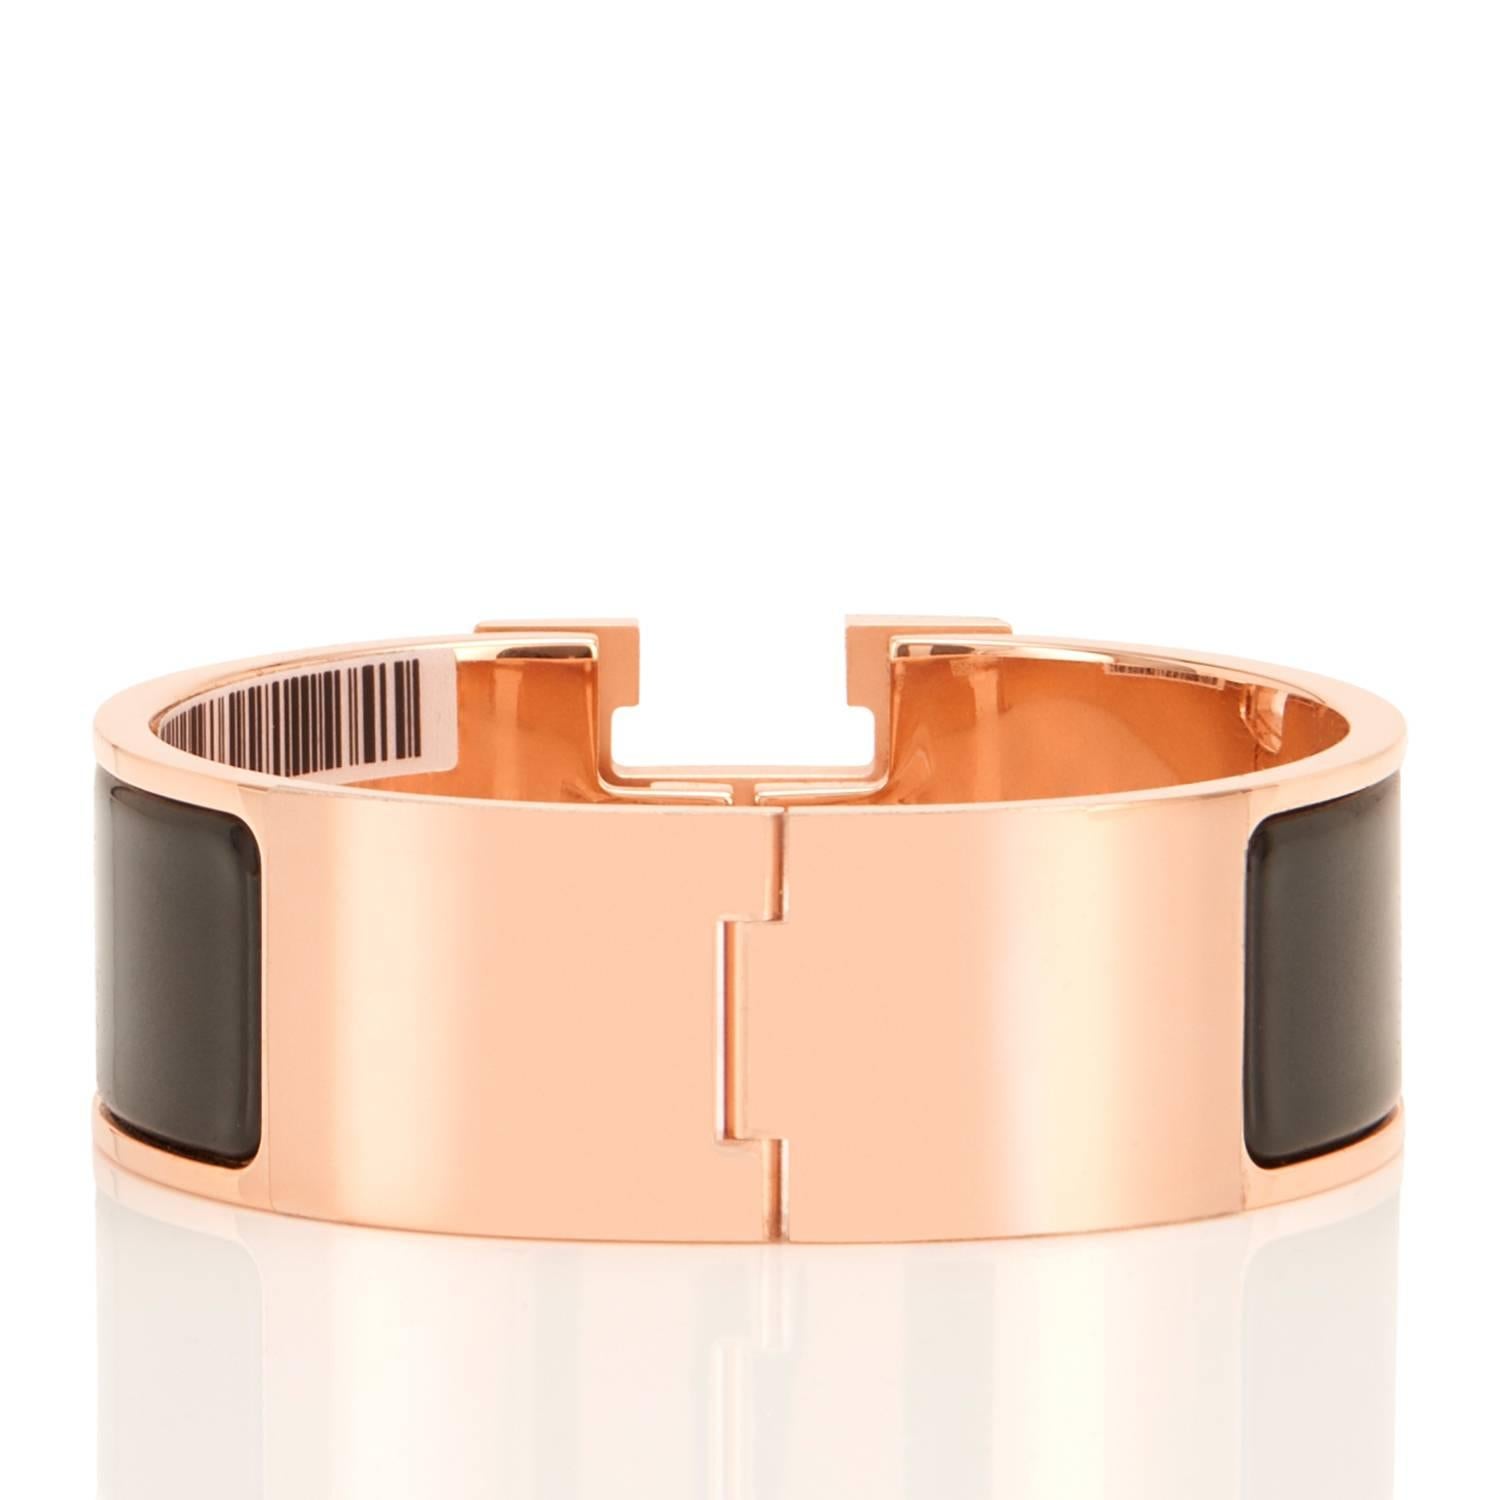 Hermes Black Clic Clac Rose Gold Enamel Bangle Wide Bracelet PM
Brand New in Box; Store Fresh. Pristine Condition.
Perfect gift! Comes with Hermes velvet pouch and orange Hermes box.
Sold out at most Hermes stores!
Black Enamel. Wide model. Size PM.